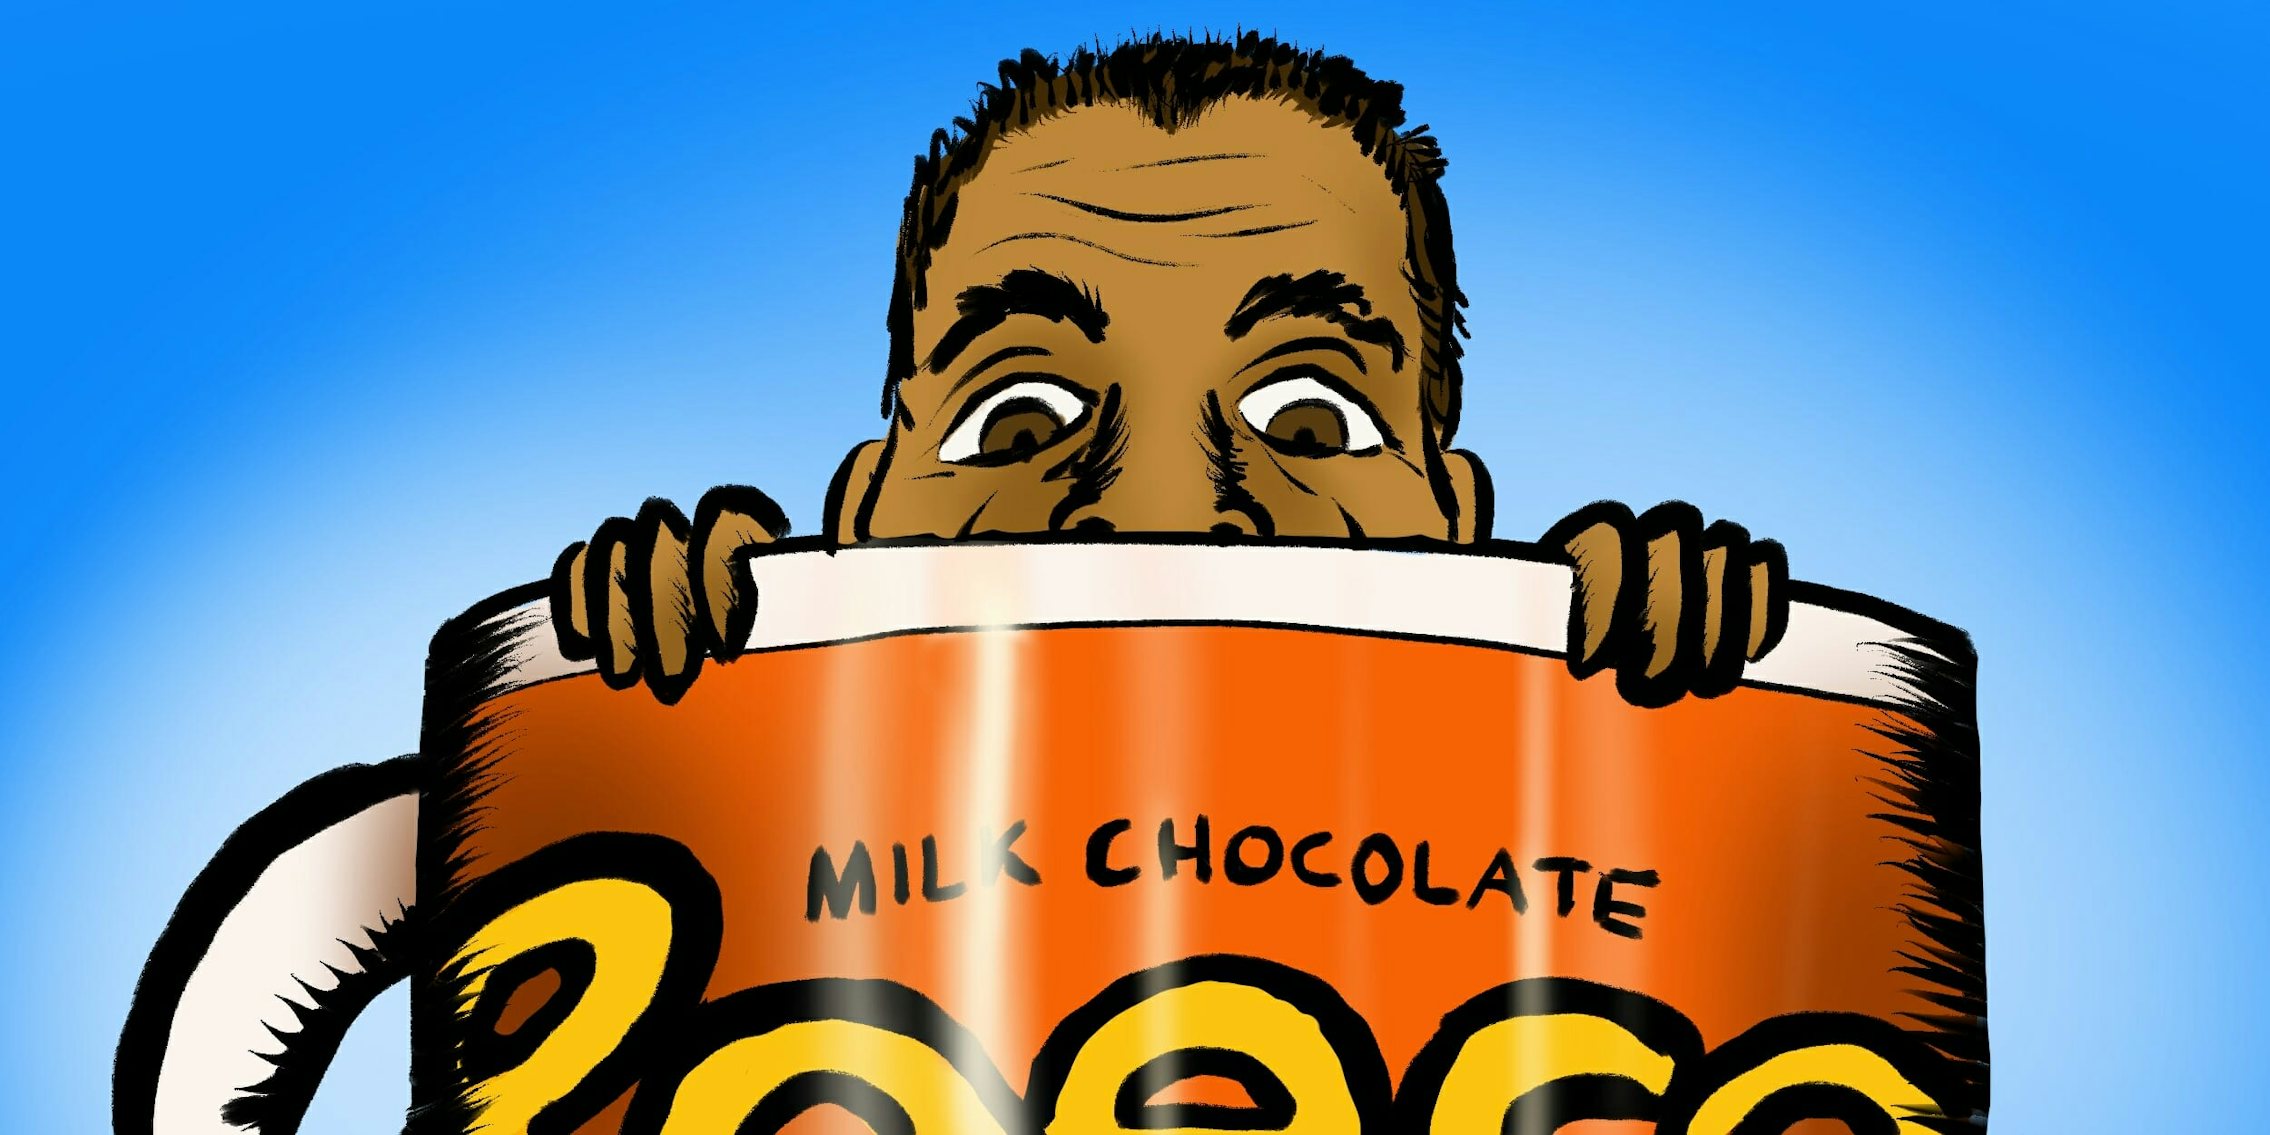 Ajit Pai Caricature behind a giant Reese's Pieces Mug